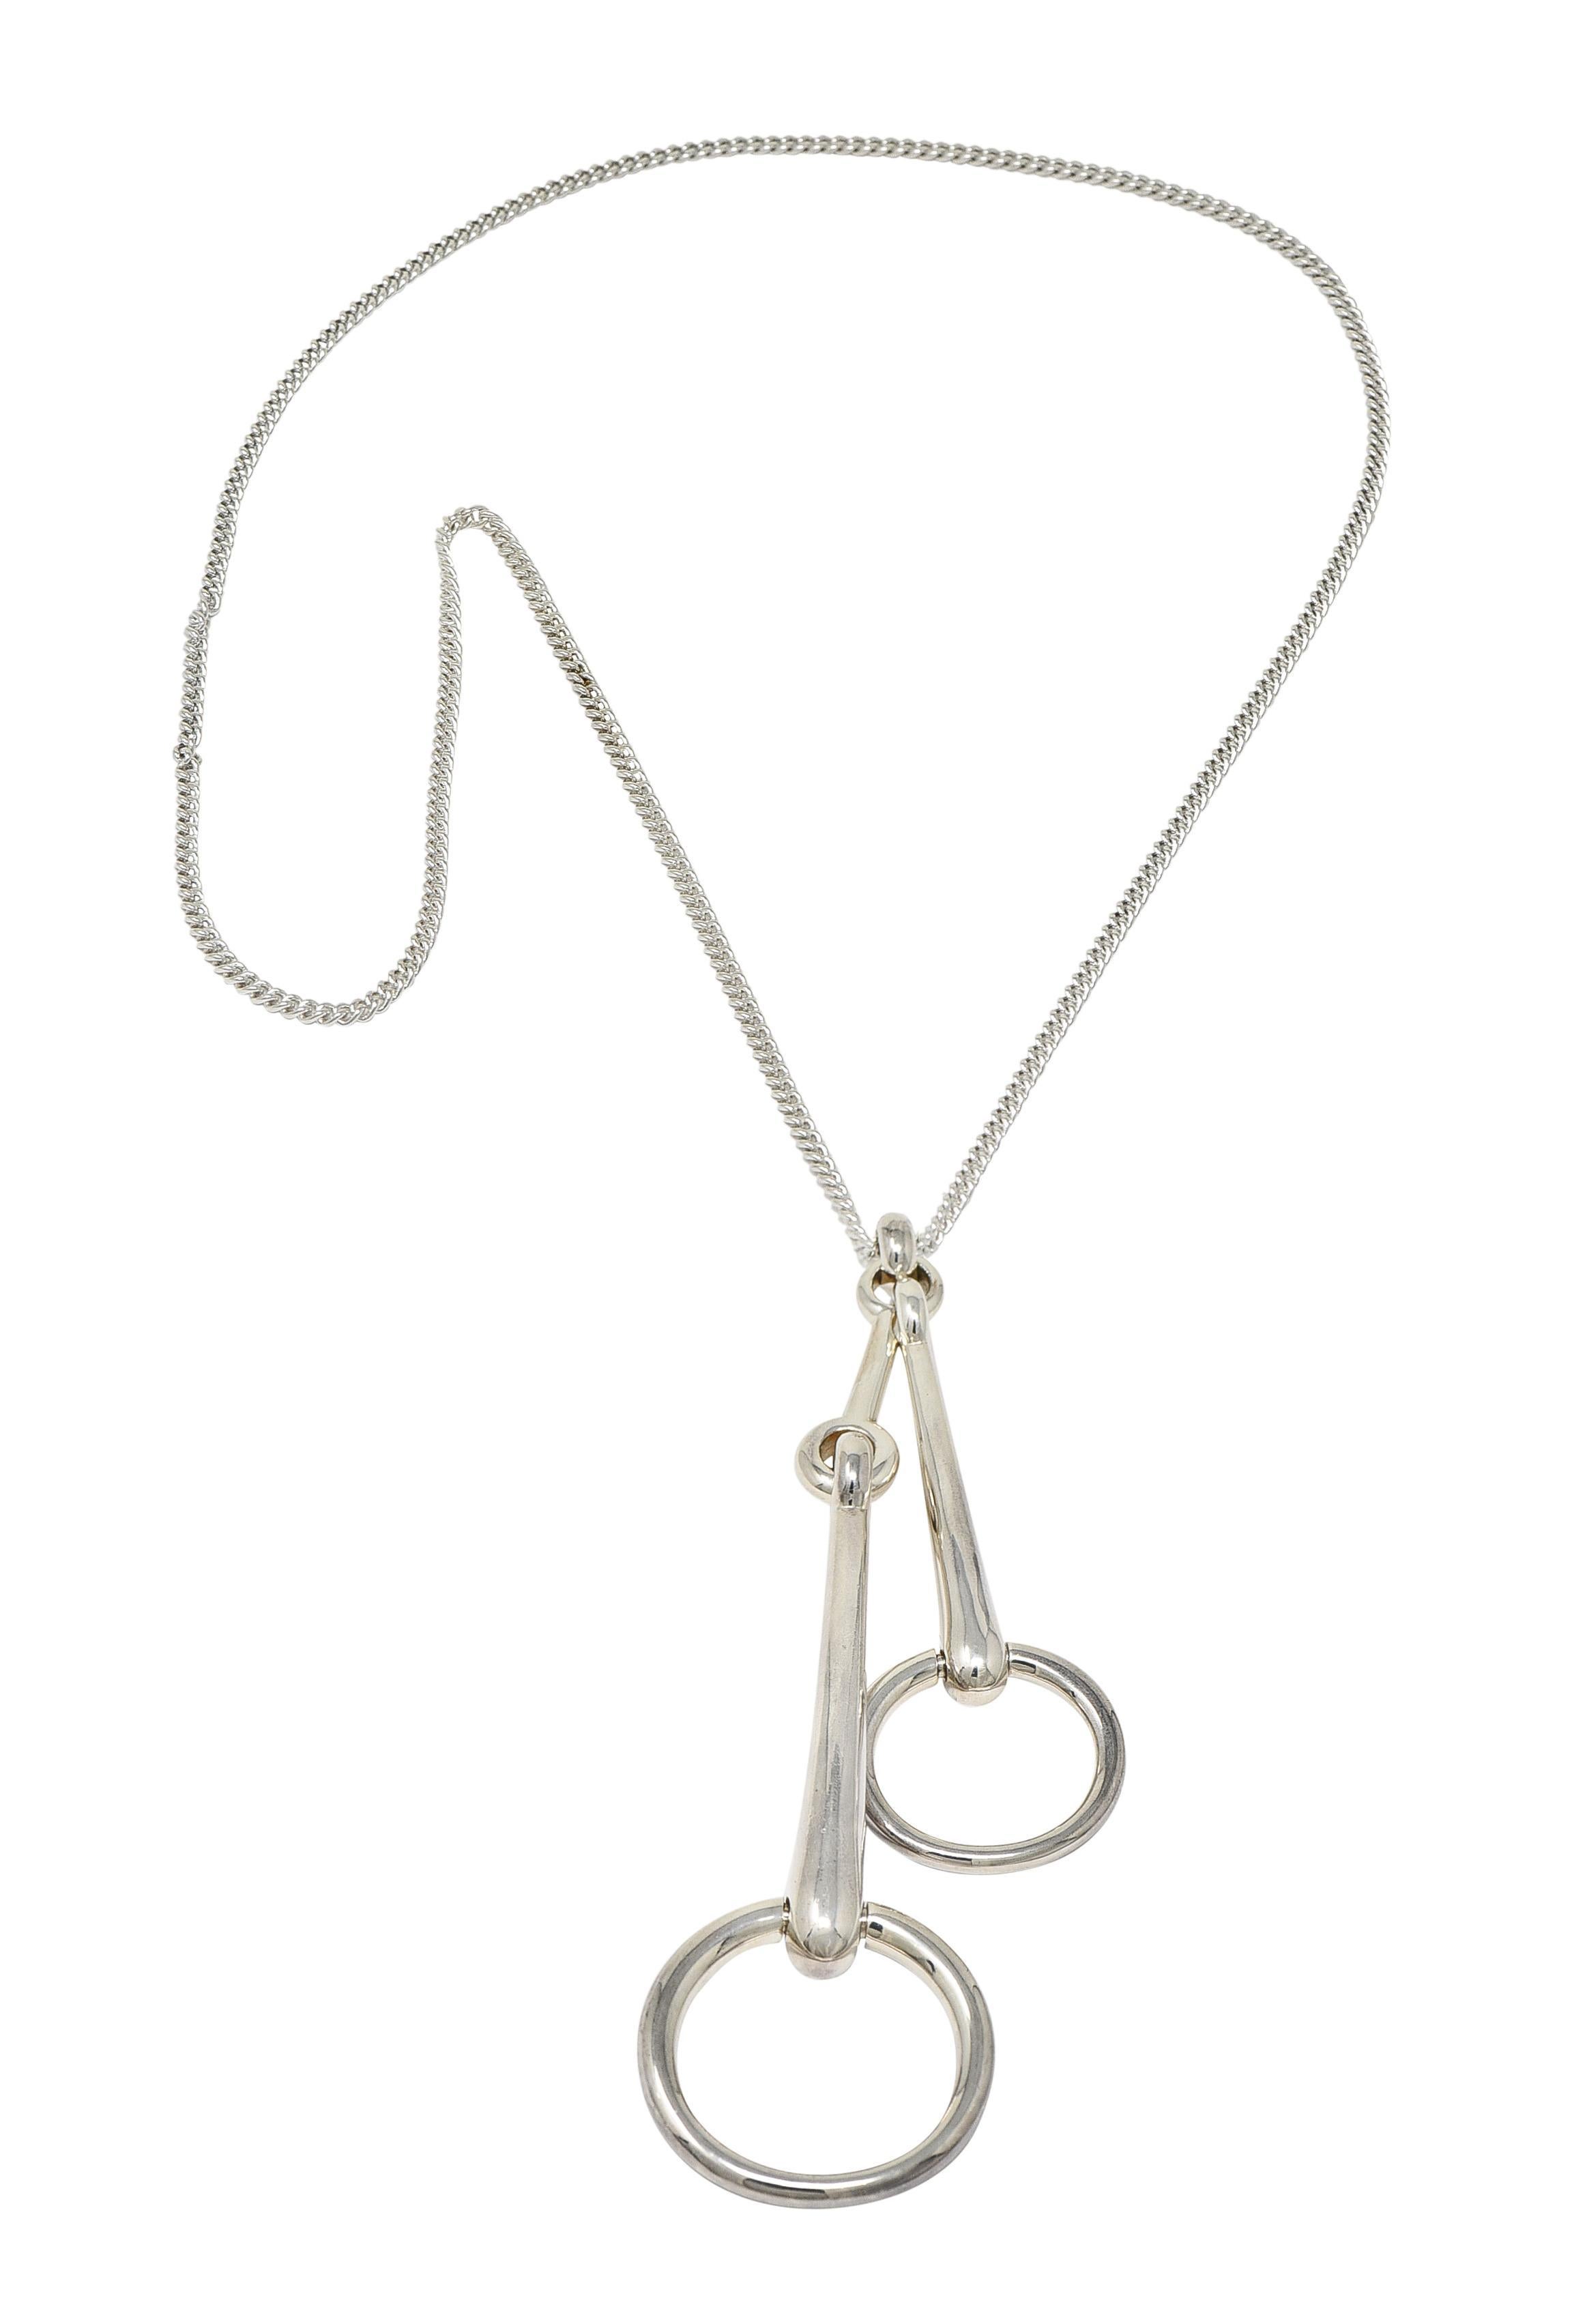 Designed as a closed curb link chain suspending a substantial horsebit pendant
Designed as one small bit and one large bit connected via bit bar
With hinged rings and looped bale
Completed by high polish finish
Stamped for sterling silver
Numbered